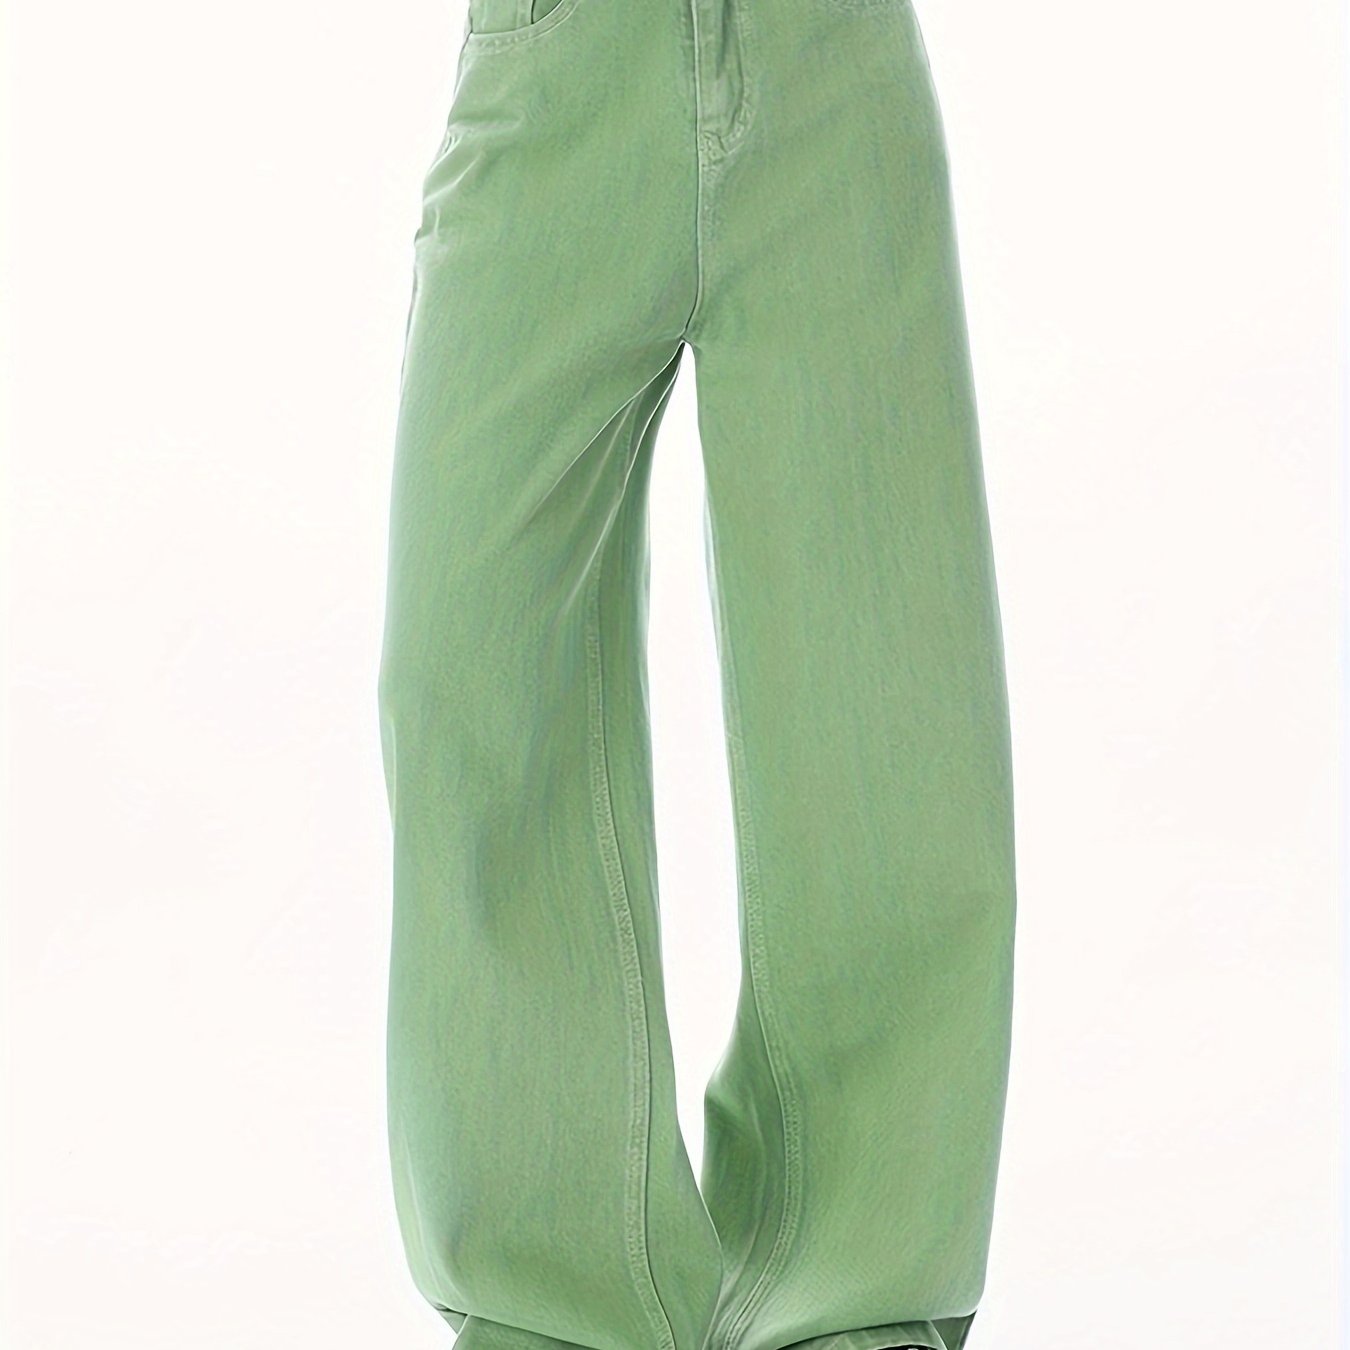 Antmvs Green Loose Fit Straight Jeans, Non-Stretch Slant Pockets Casual Wide Legs Jeans, Women's Denim Jeans & Clothing